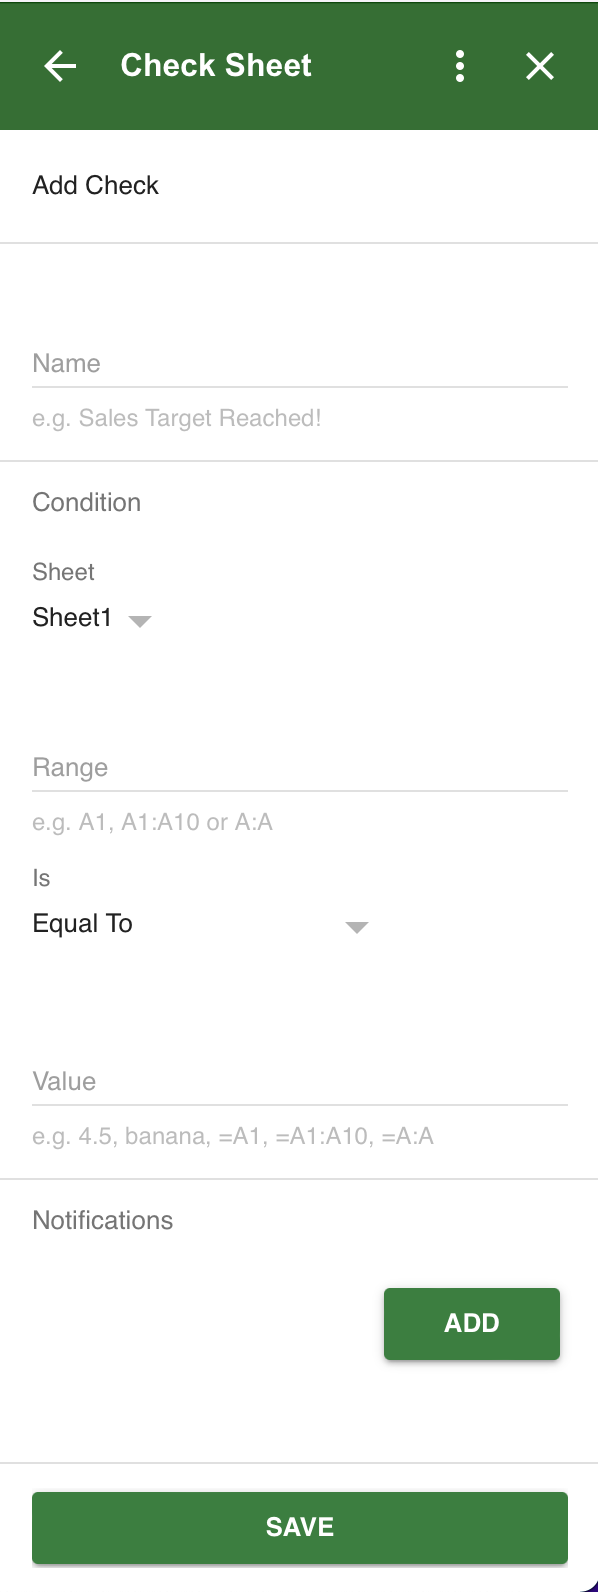 Screenshot showing the form for adding a new Check in the Check Sheet app